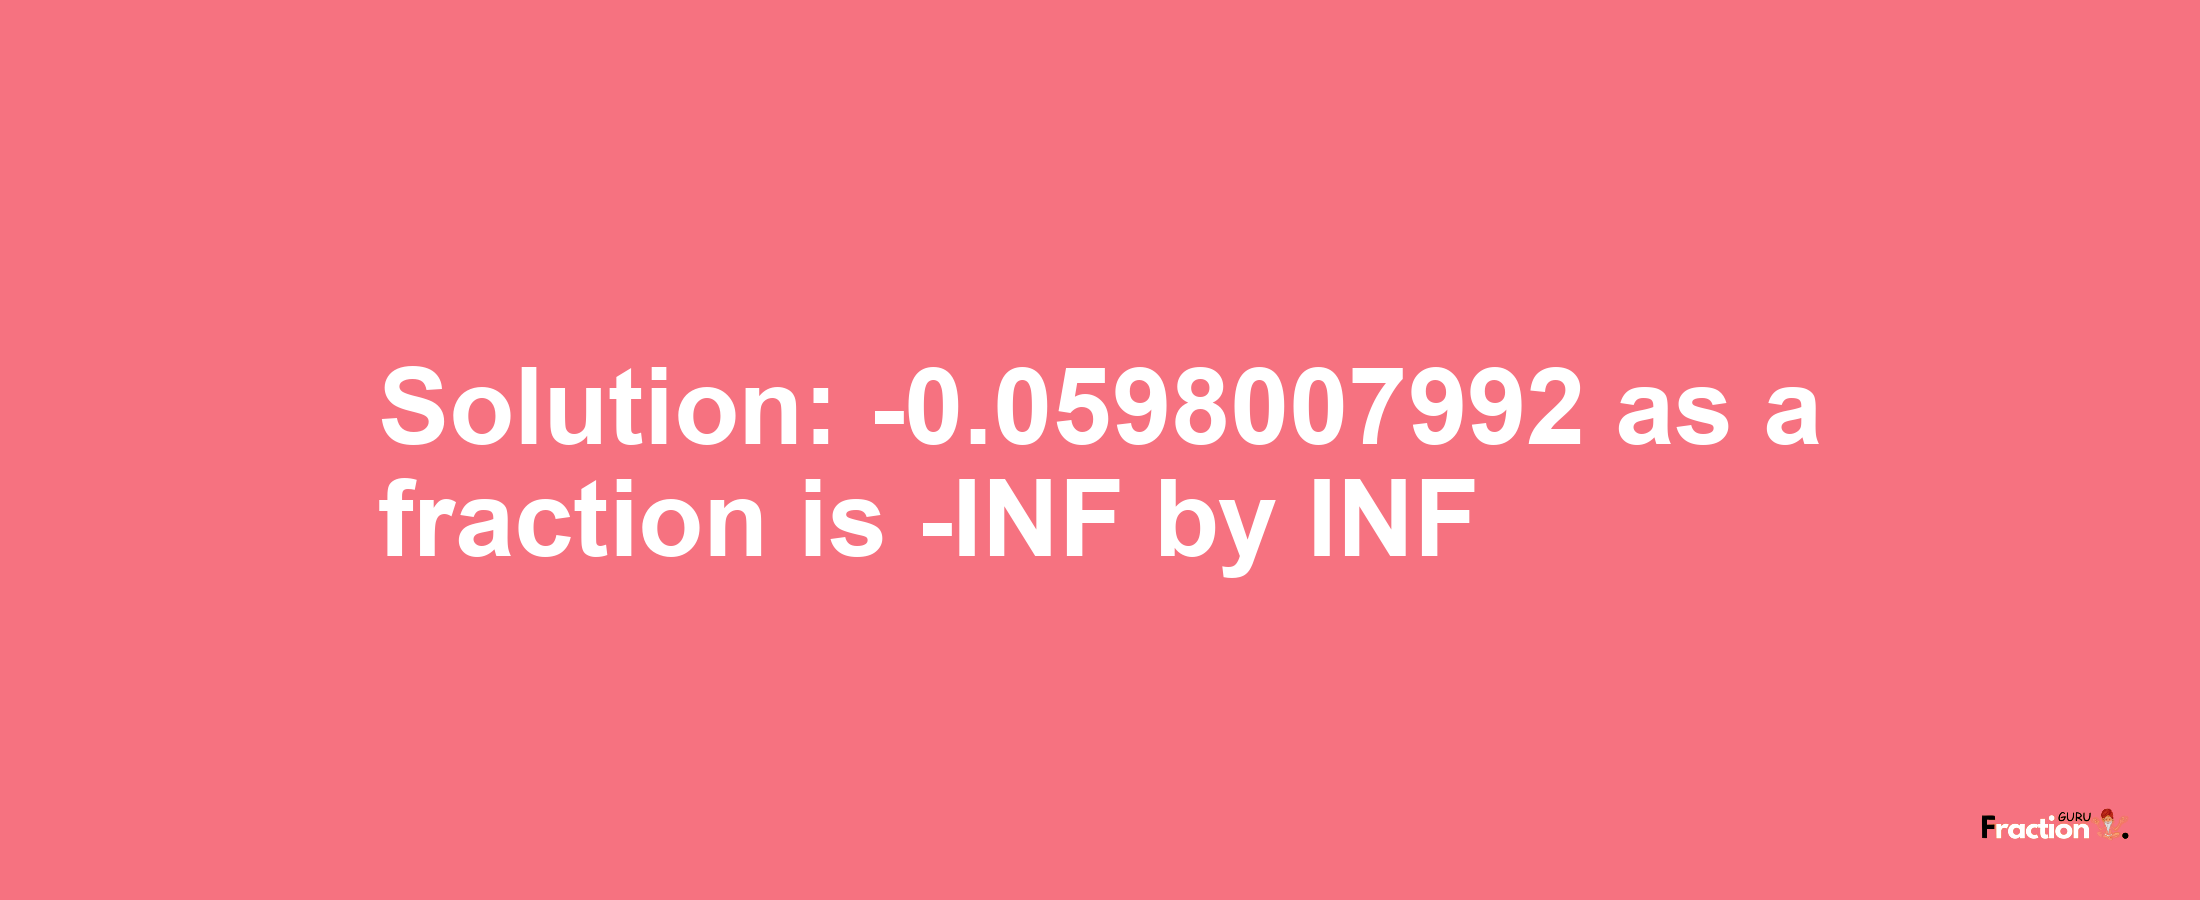 Solution:-0.0598007992 as a fraction is -INF/INF